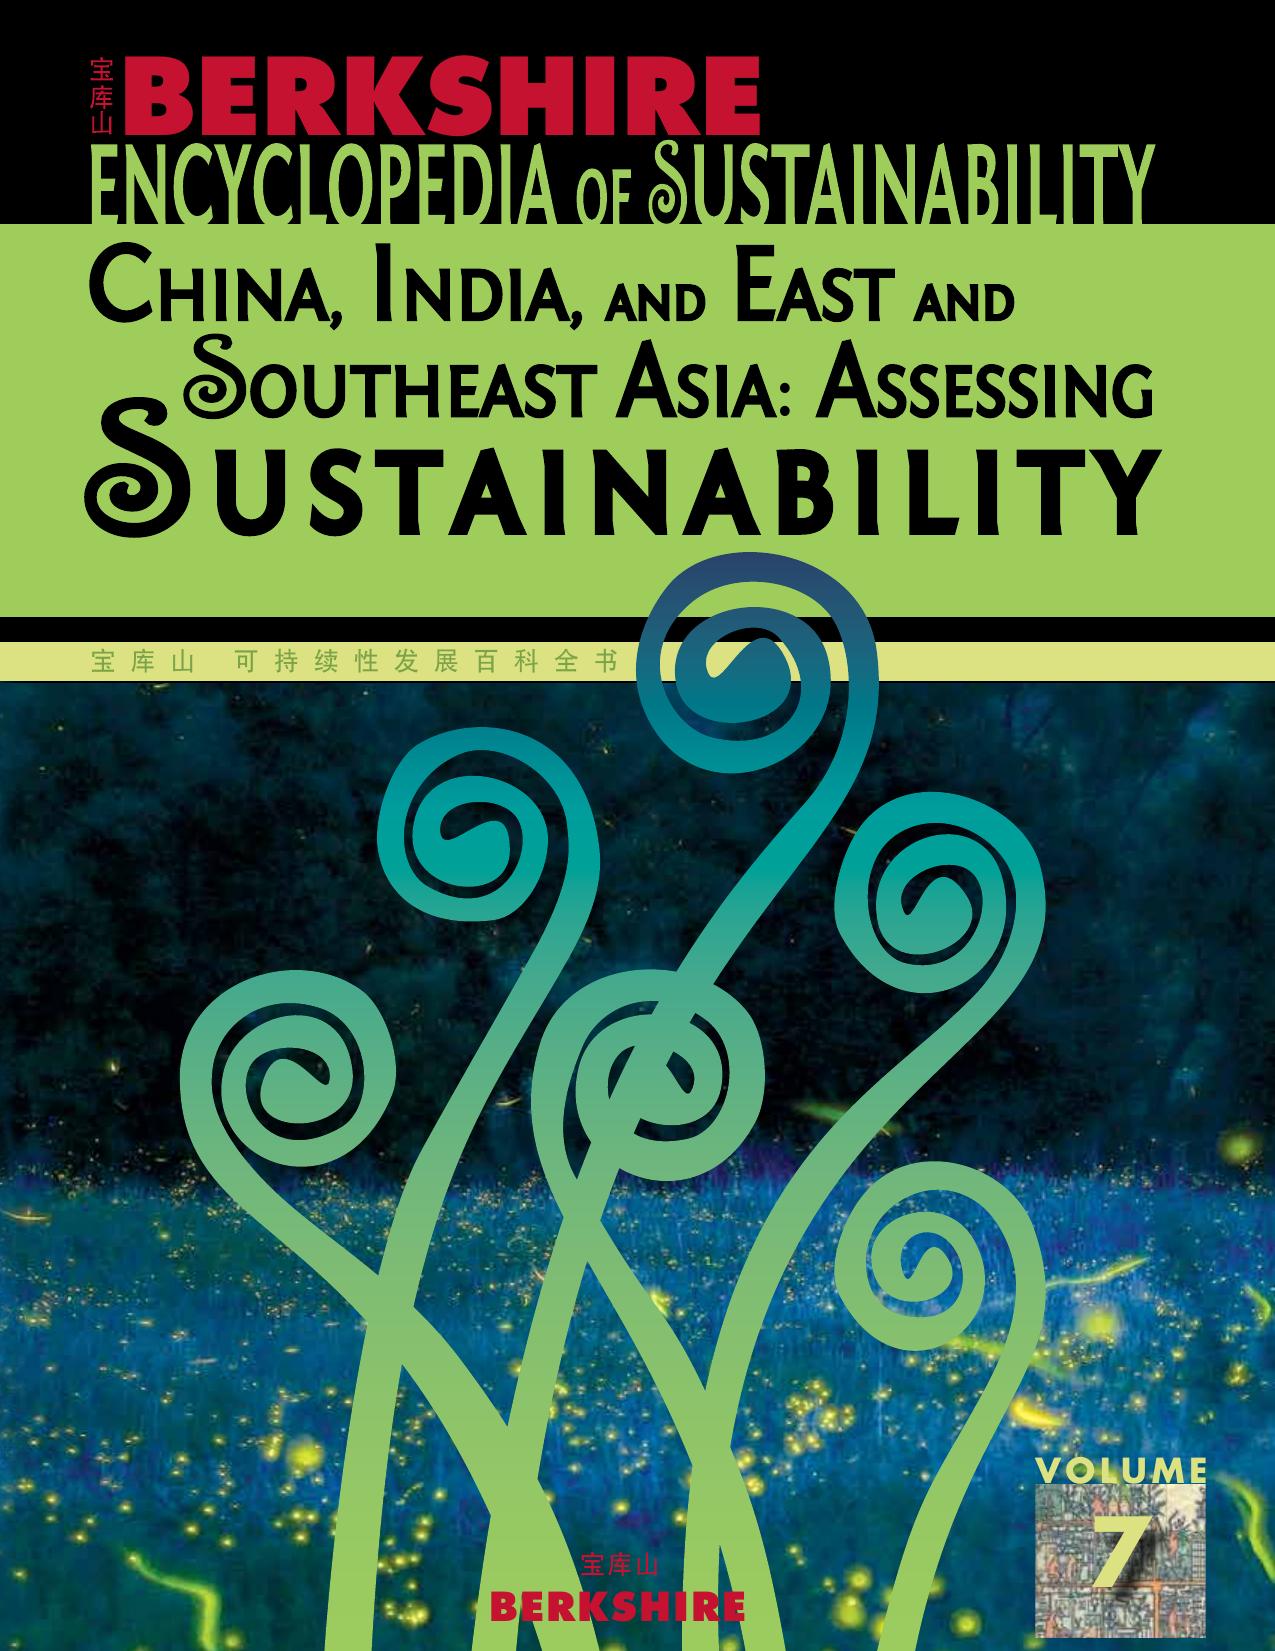 Berkshire Encyclopedia of Sustainability 7/10: China, India, and East and Southeast Asia : Assessing Sustainability